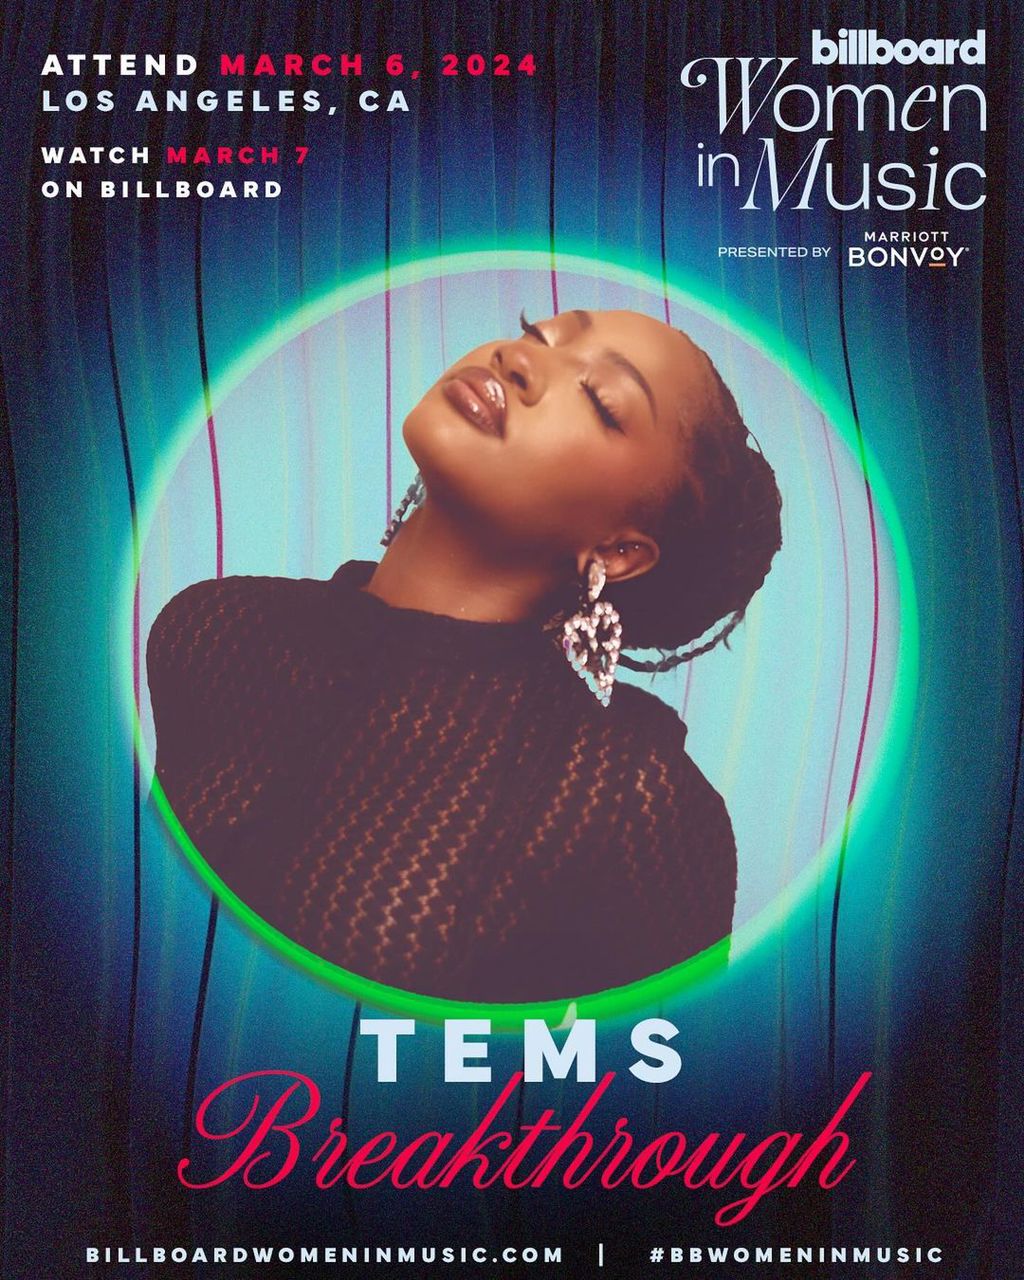 Tems Will Receive the ‘Breakthrough Award’ at the 2024 Billboard Women in Music Awards